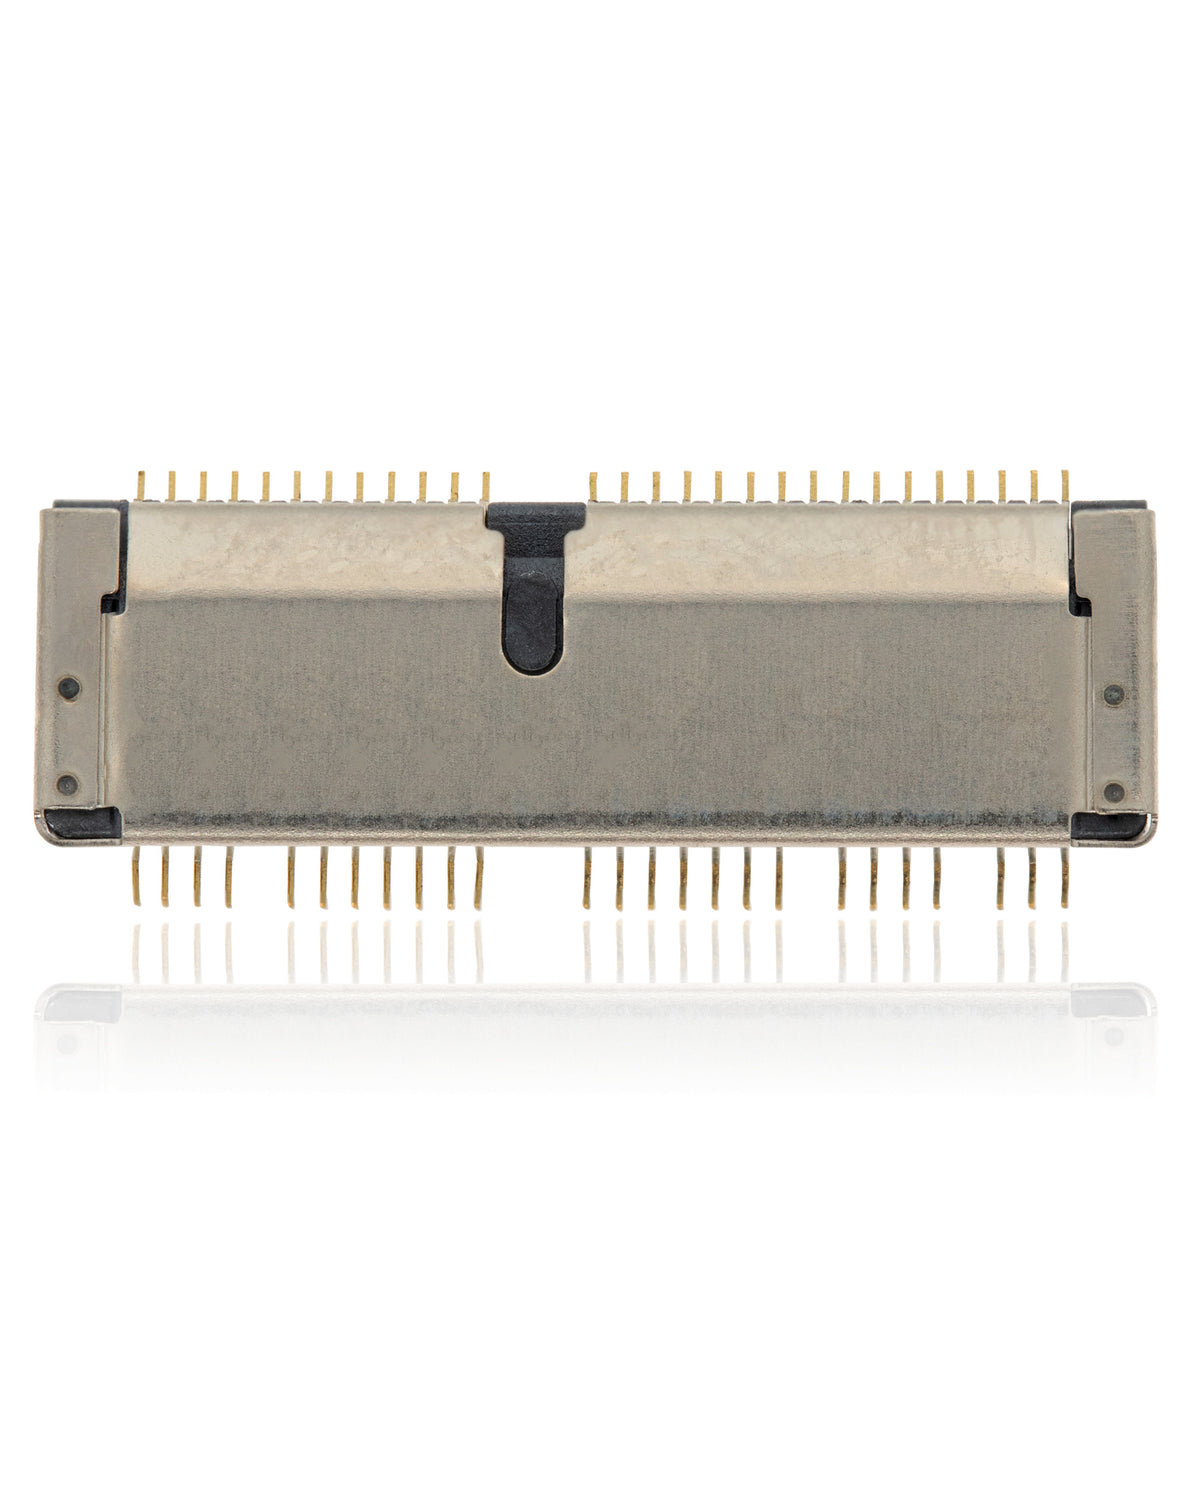 SSD CONNECTOR FOR MACBOOK AIR 13" A1466 ( MID 2013 / EARLY 2014 / EARLY 2015 / MID 2017)